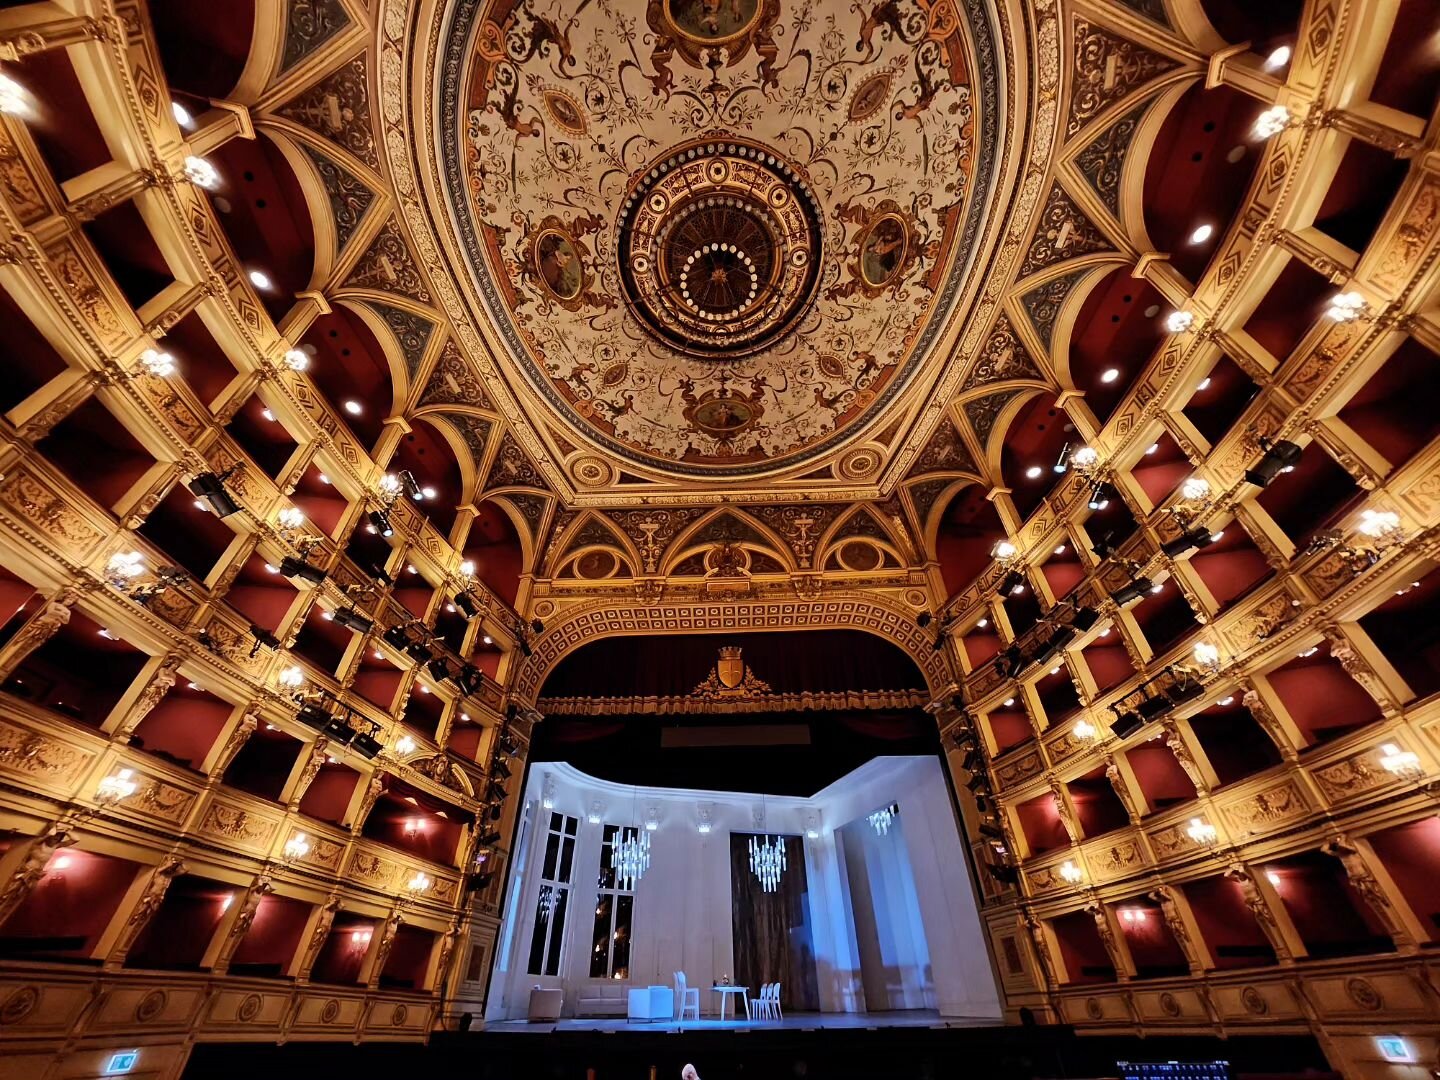 I arrived in #Trieste late last night after travelling to Italy from #muscat #Oman . The beautiful @teatroverdits is designed to look like a miniature Teatro La Scala. 

Rehearsals are well underway for our production of #ariadneaufnaxos by #richards